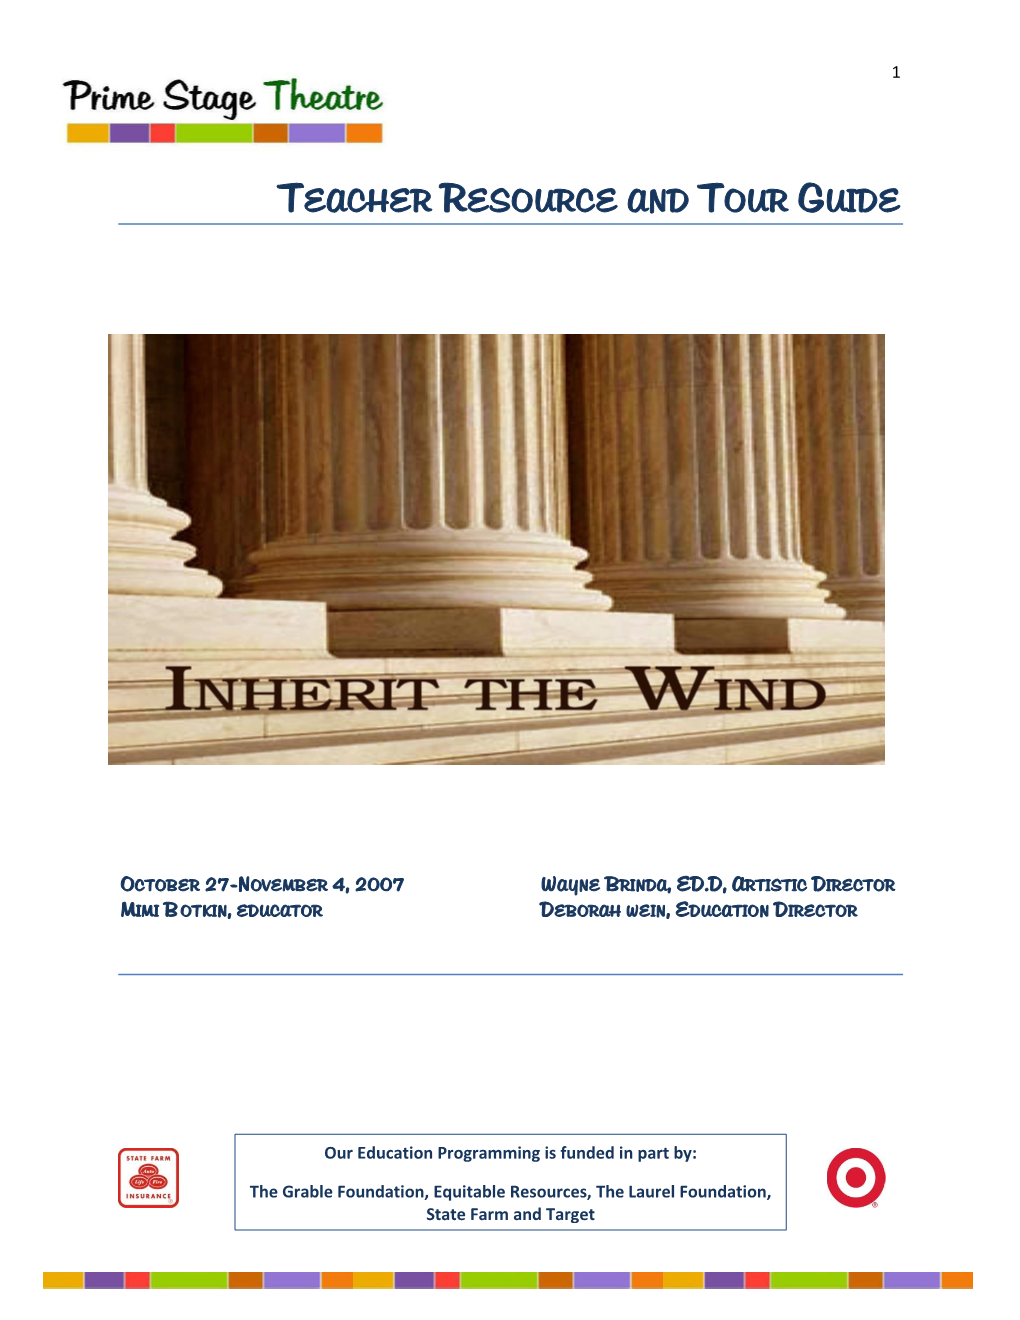 Teacher Resource and Tour Guide